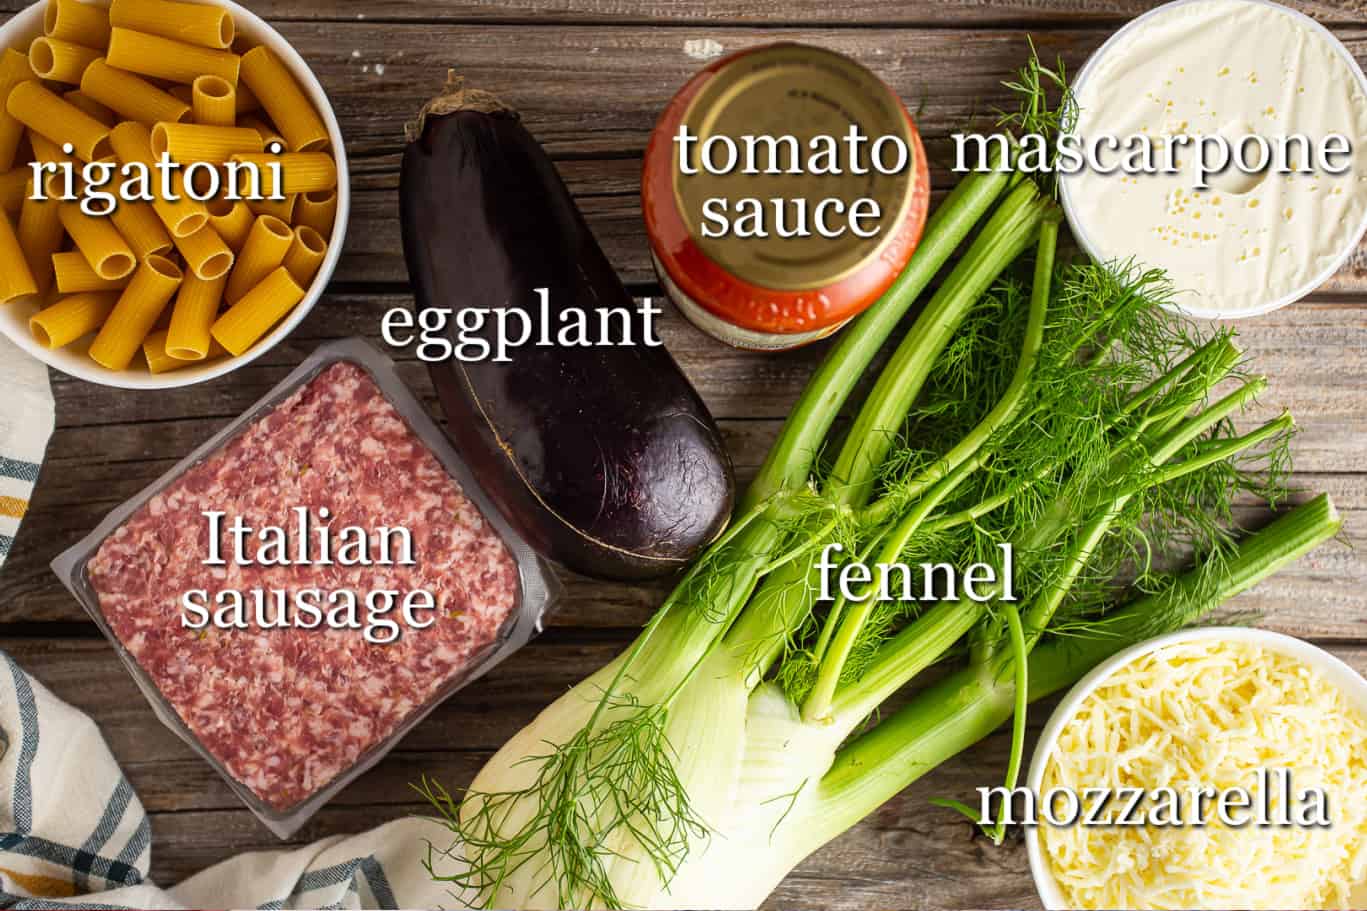 Ingredients for making baked rigatoni, with text labels.